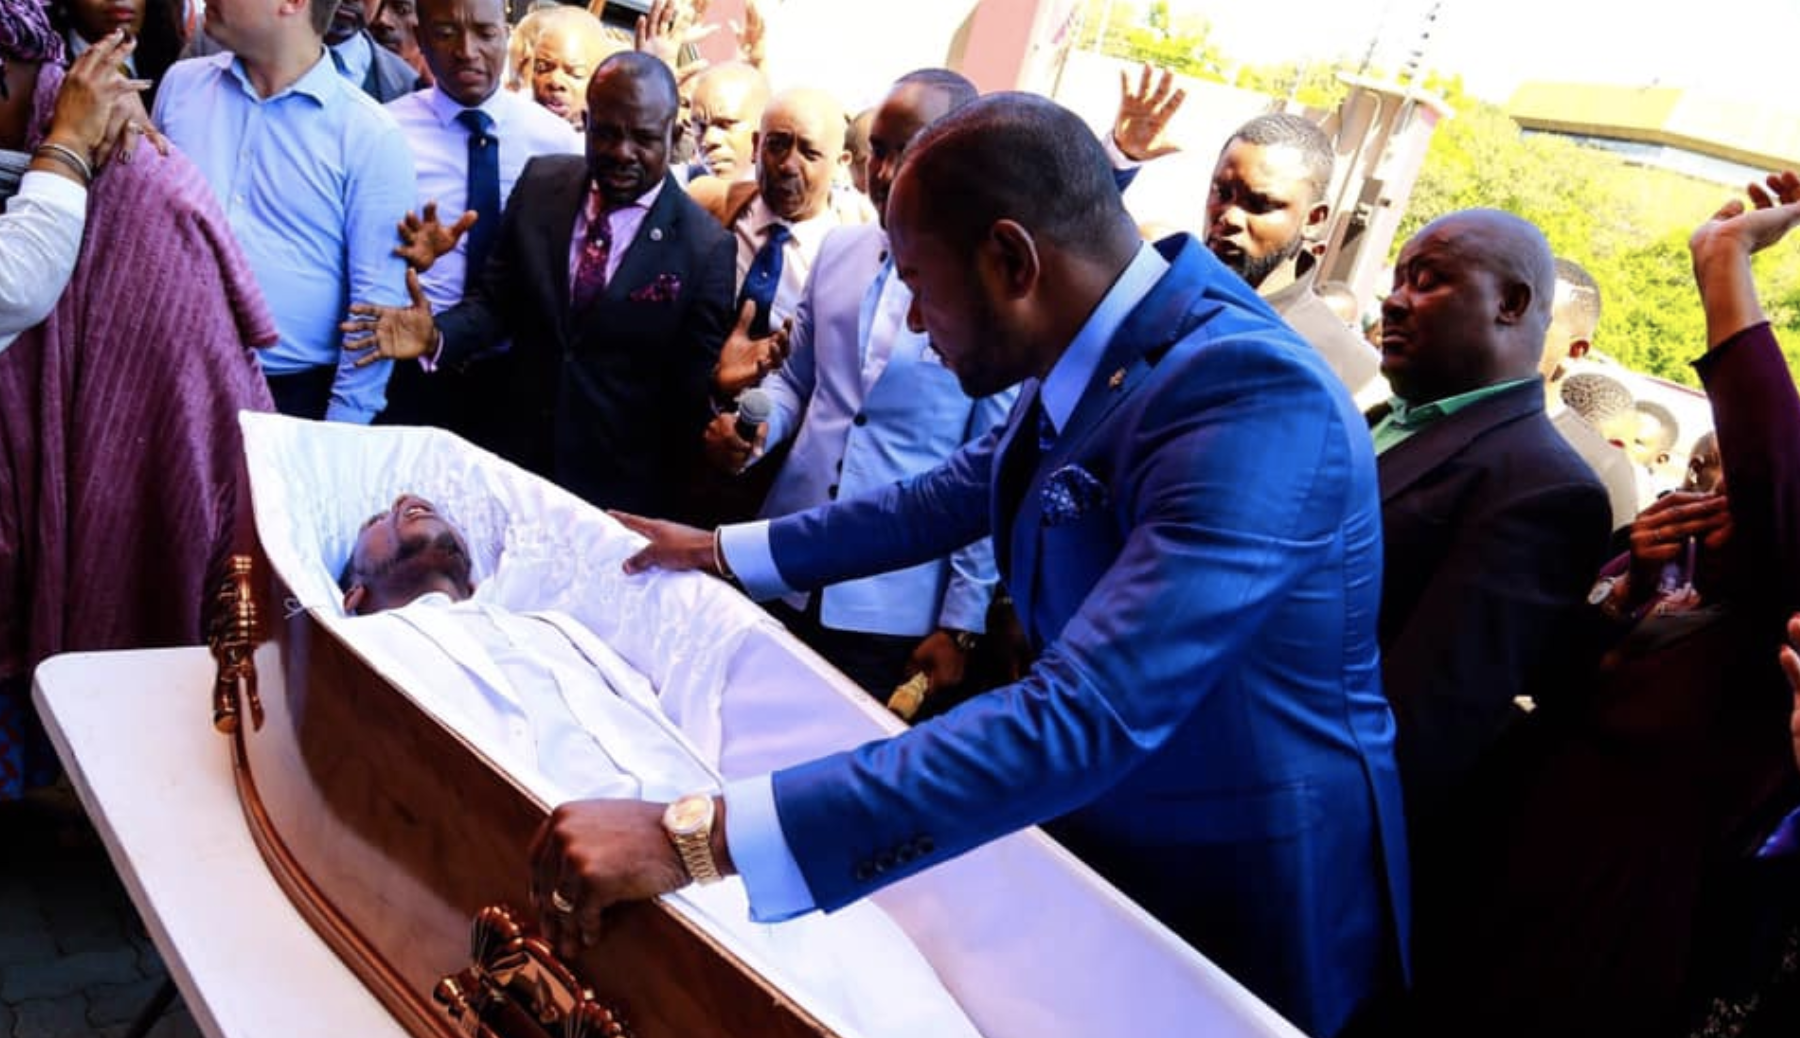 South African Pastor Mocked Online After Performing 'Resurrection' At Funeral